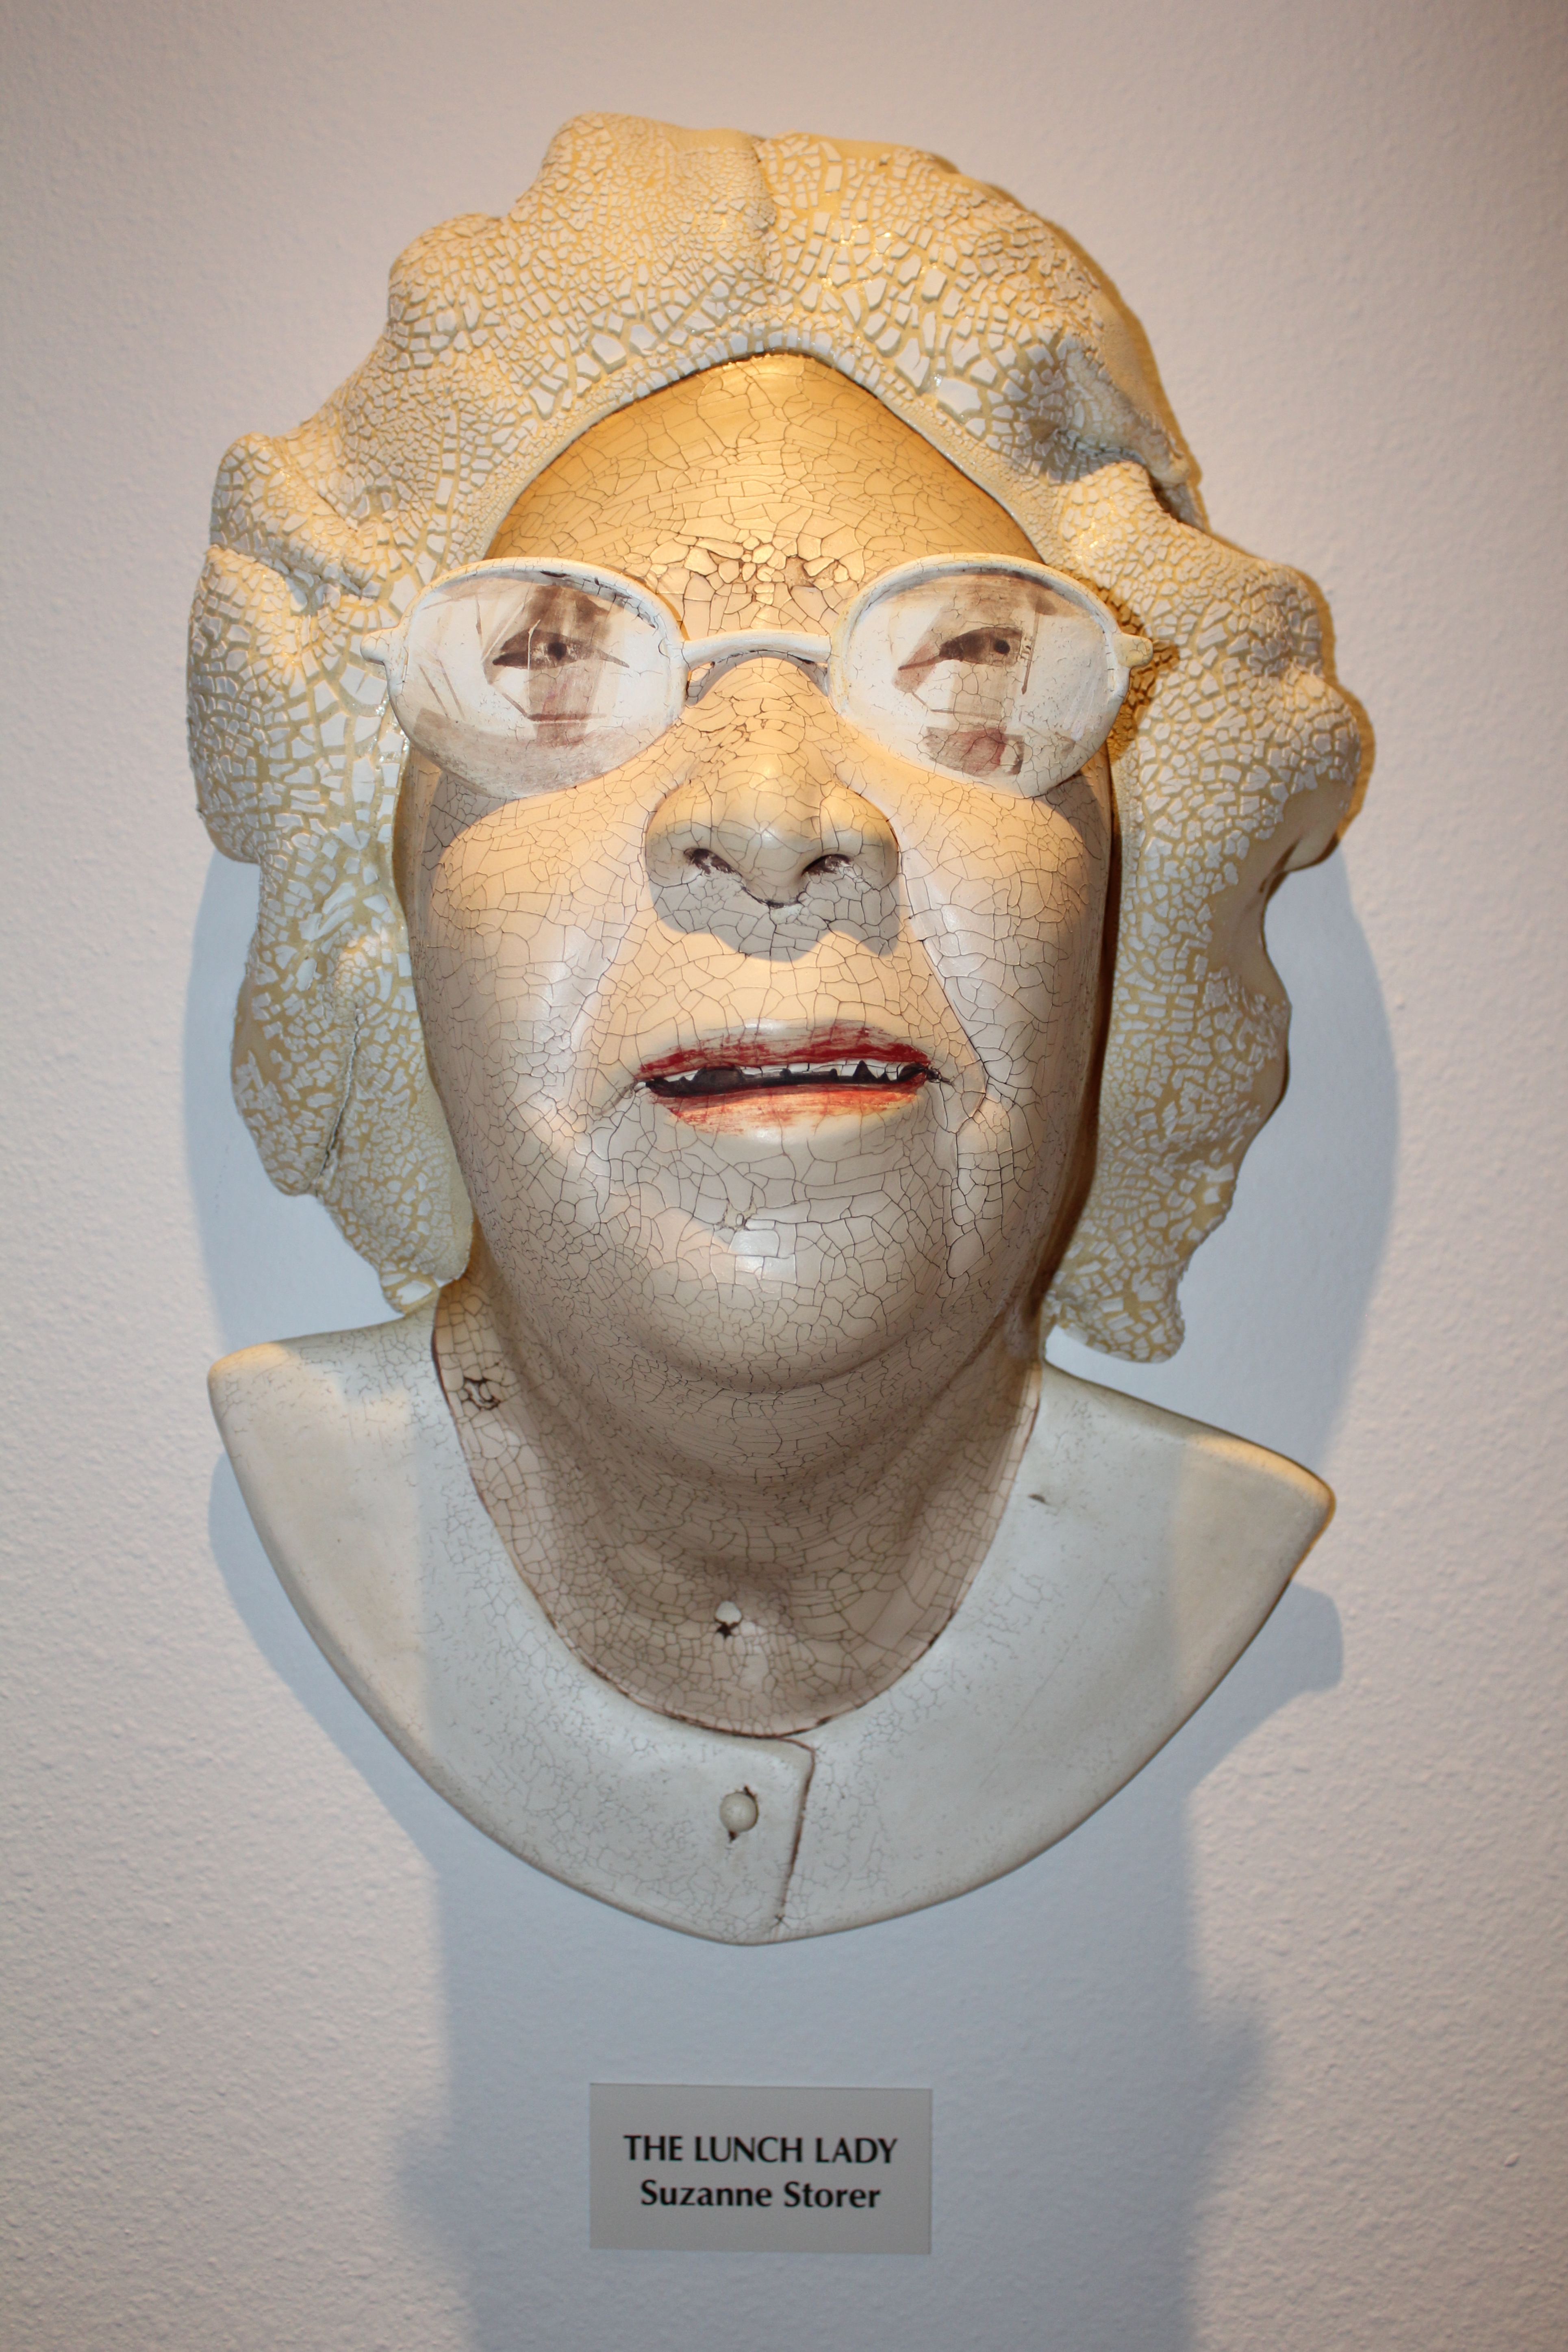 2019 Sculpture: The Lunch Lady